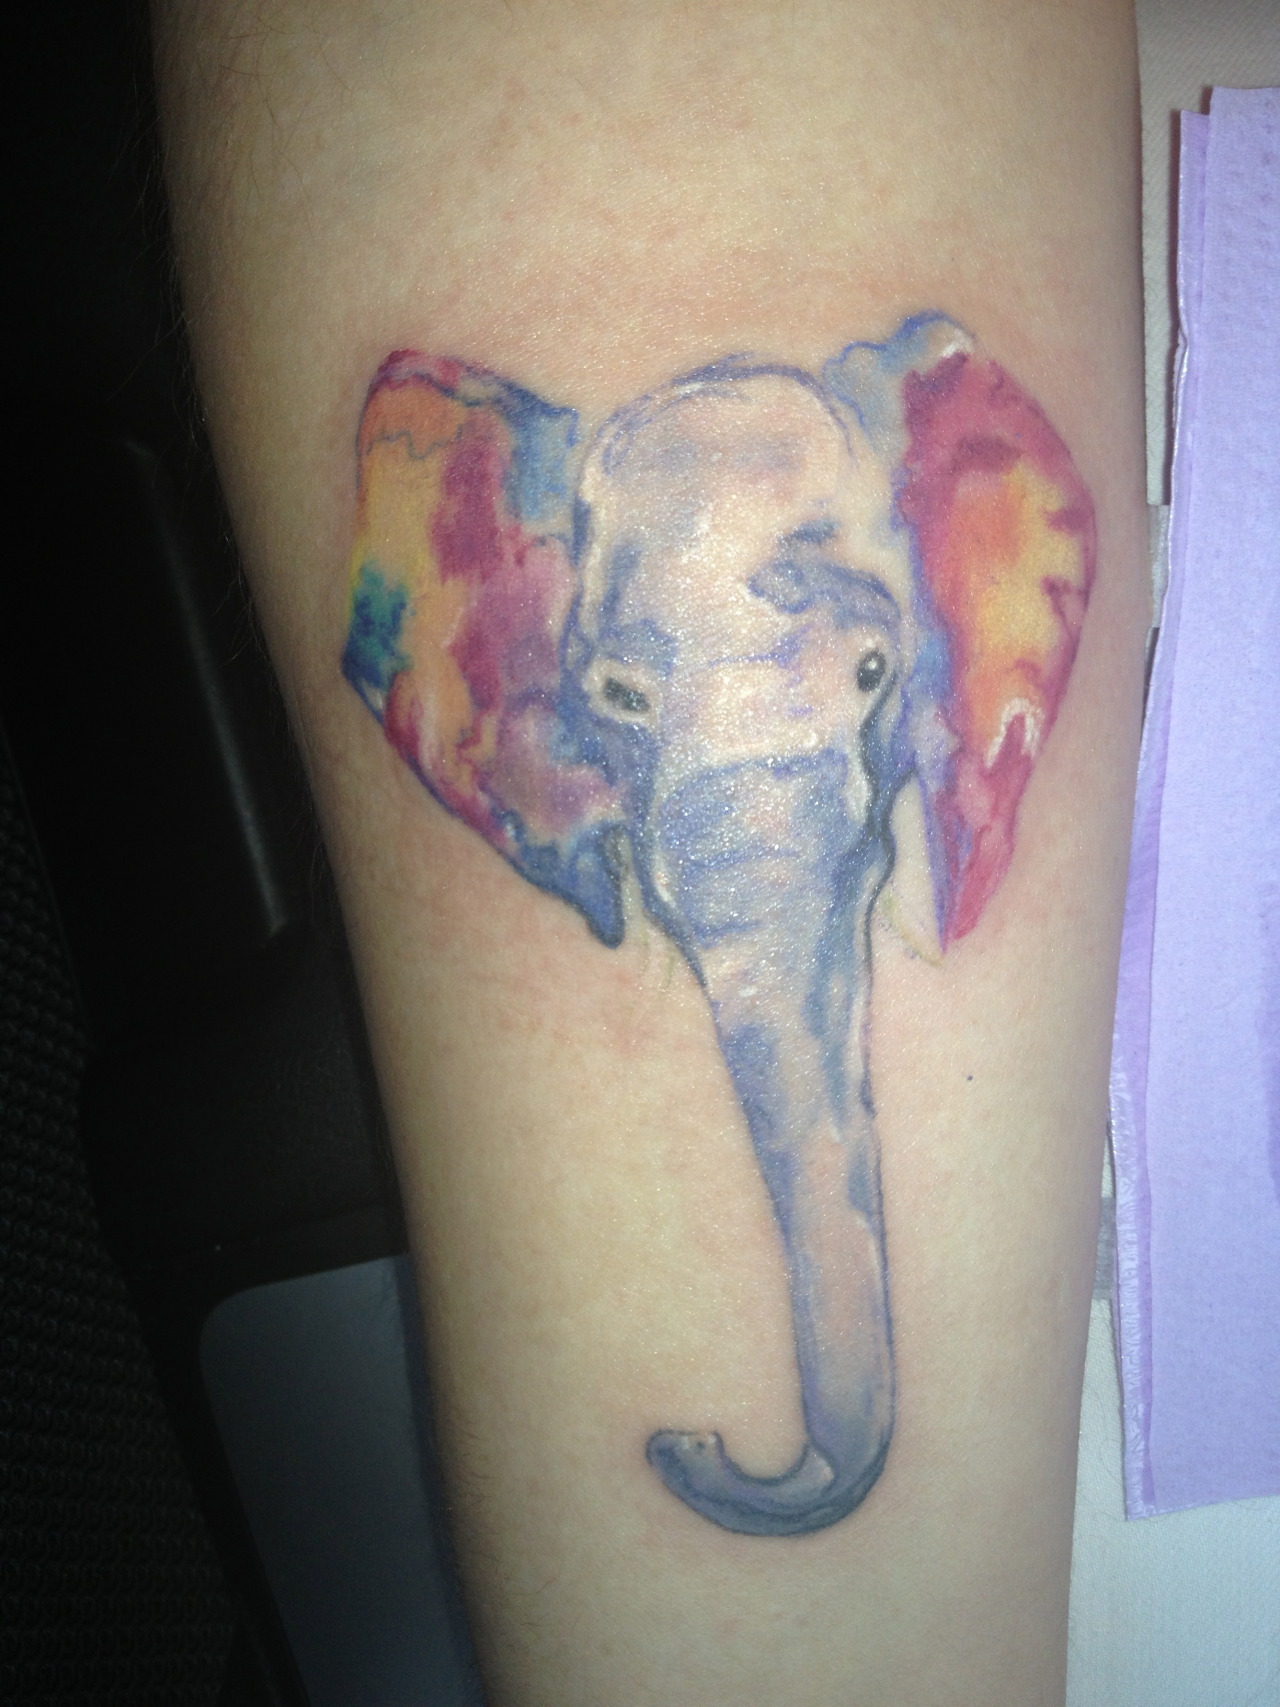 A splash of color to brighten up the day 🌈🐘 By @tattoosbylaineybee ... |  TikTok